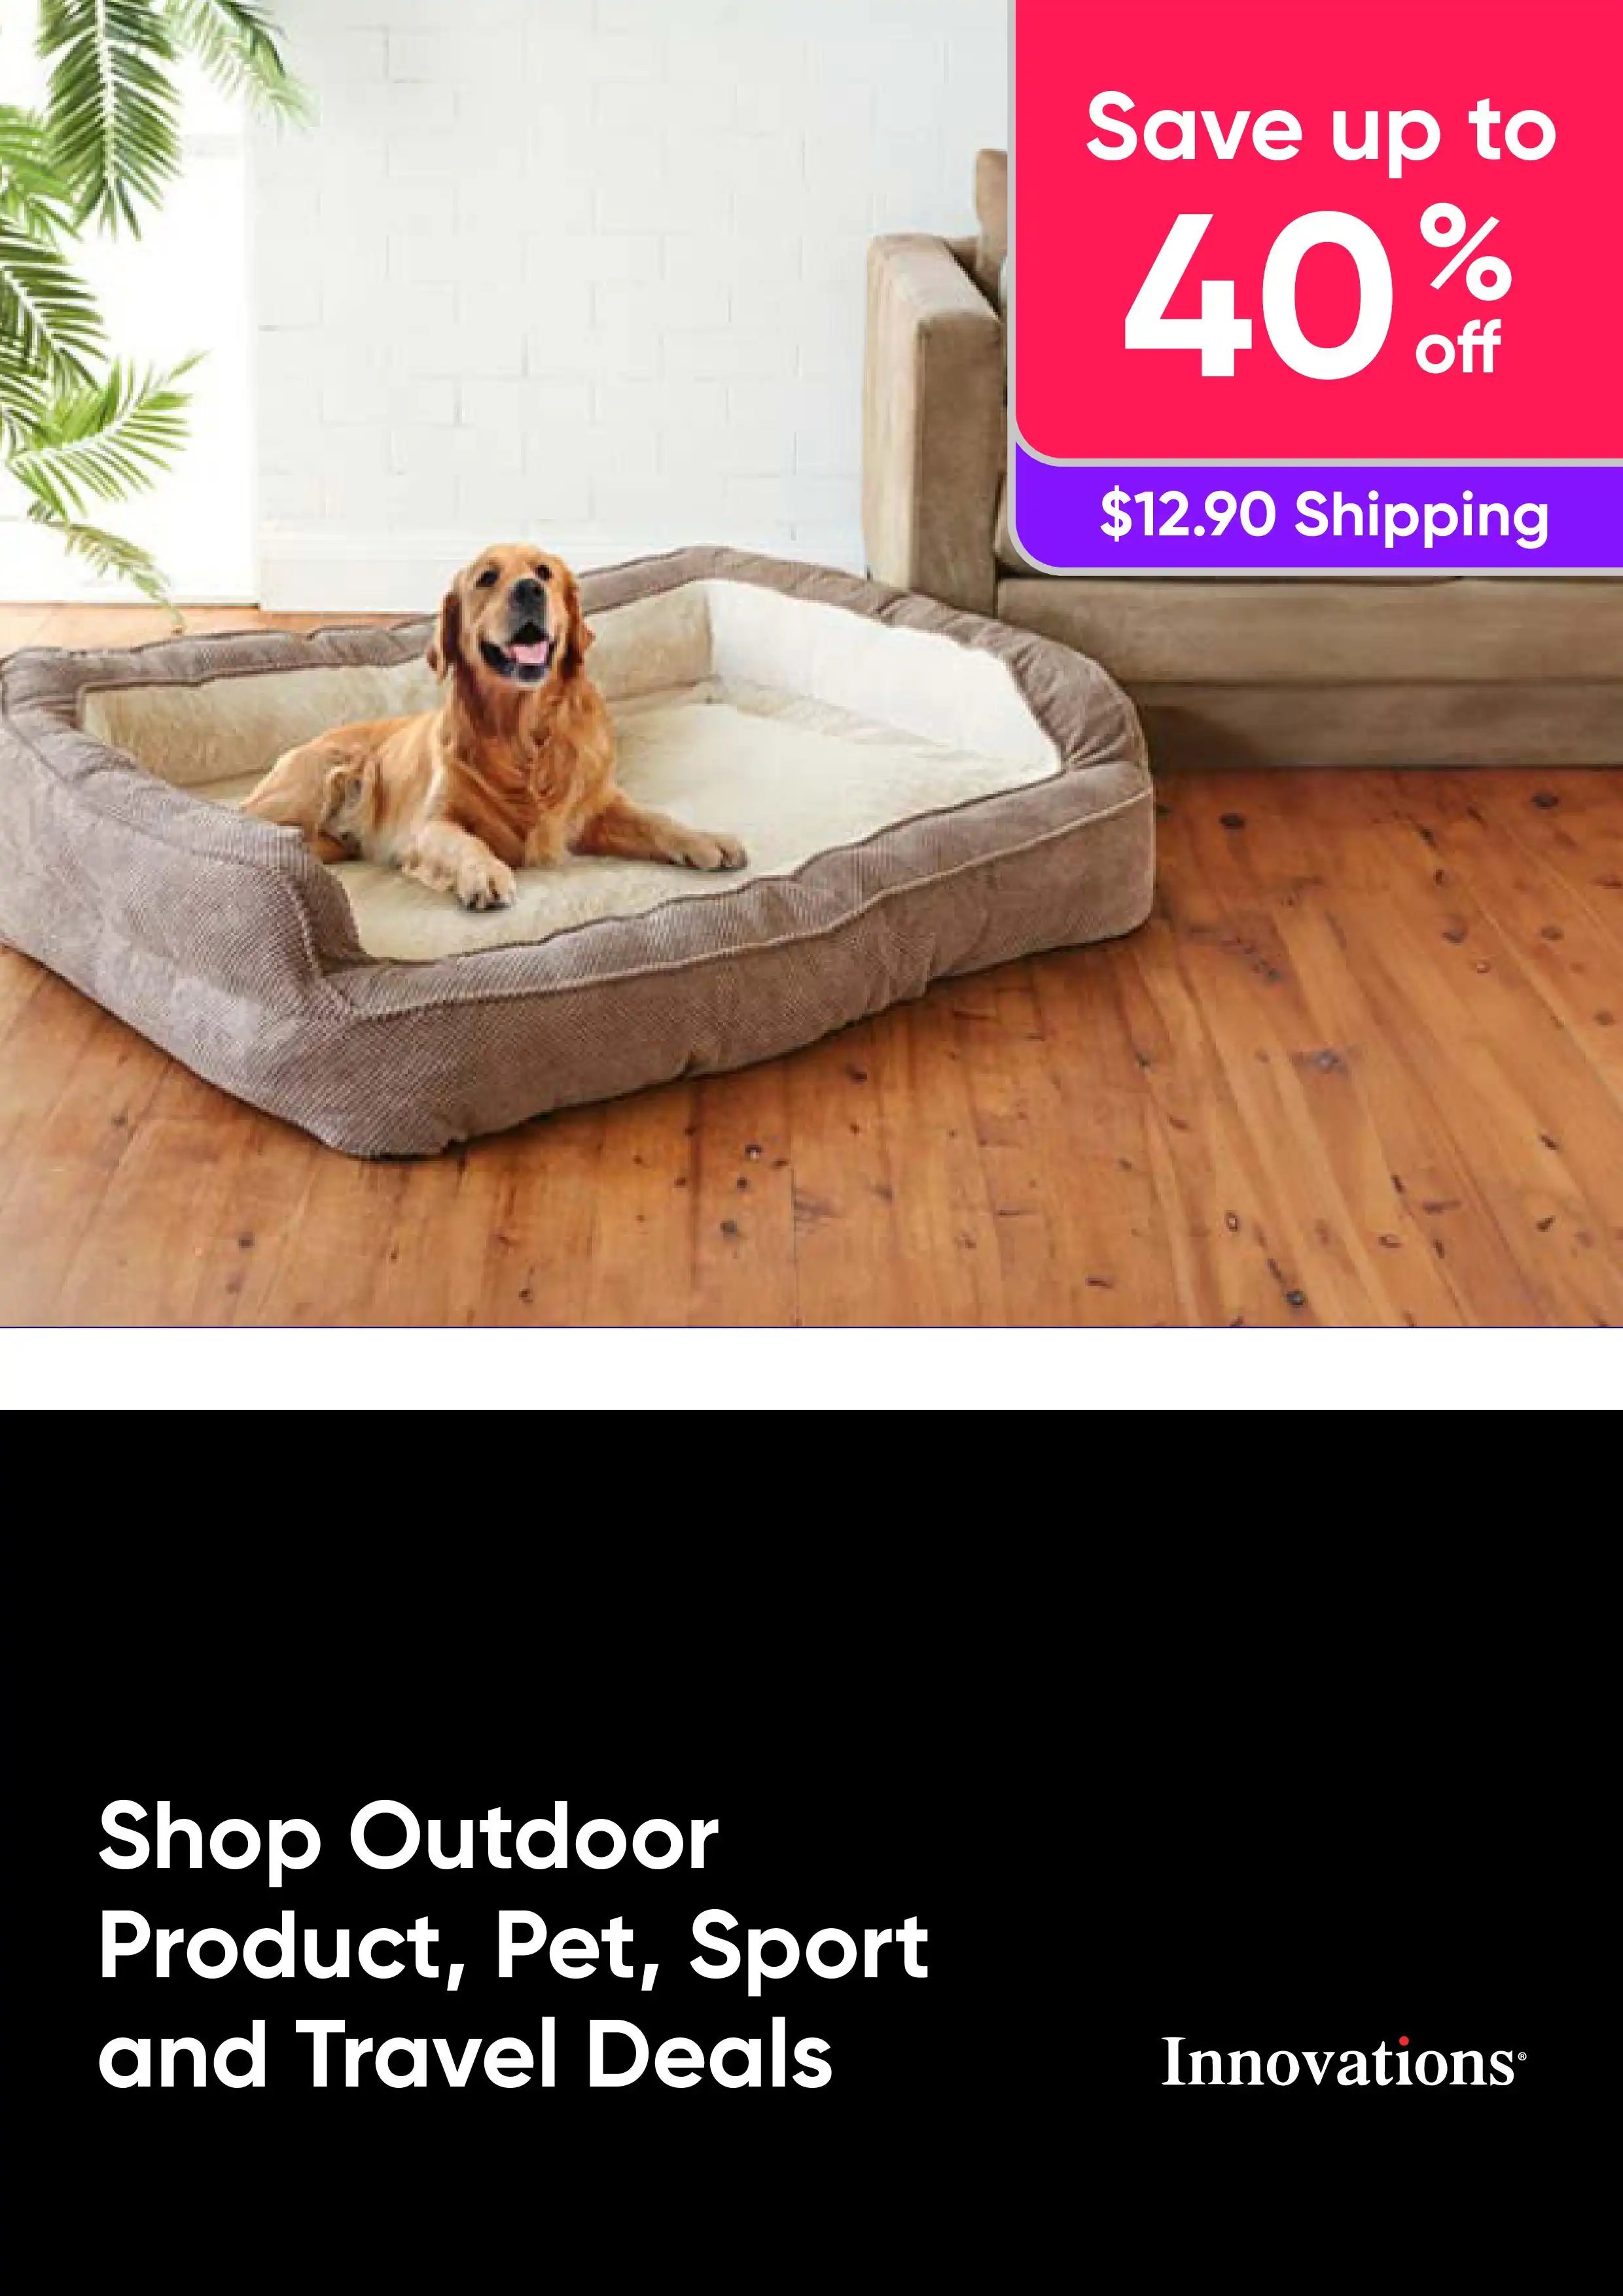 Buy Outdoor Products, Pets, Sports and Travel Deals Up to 35% Off